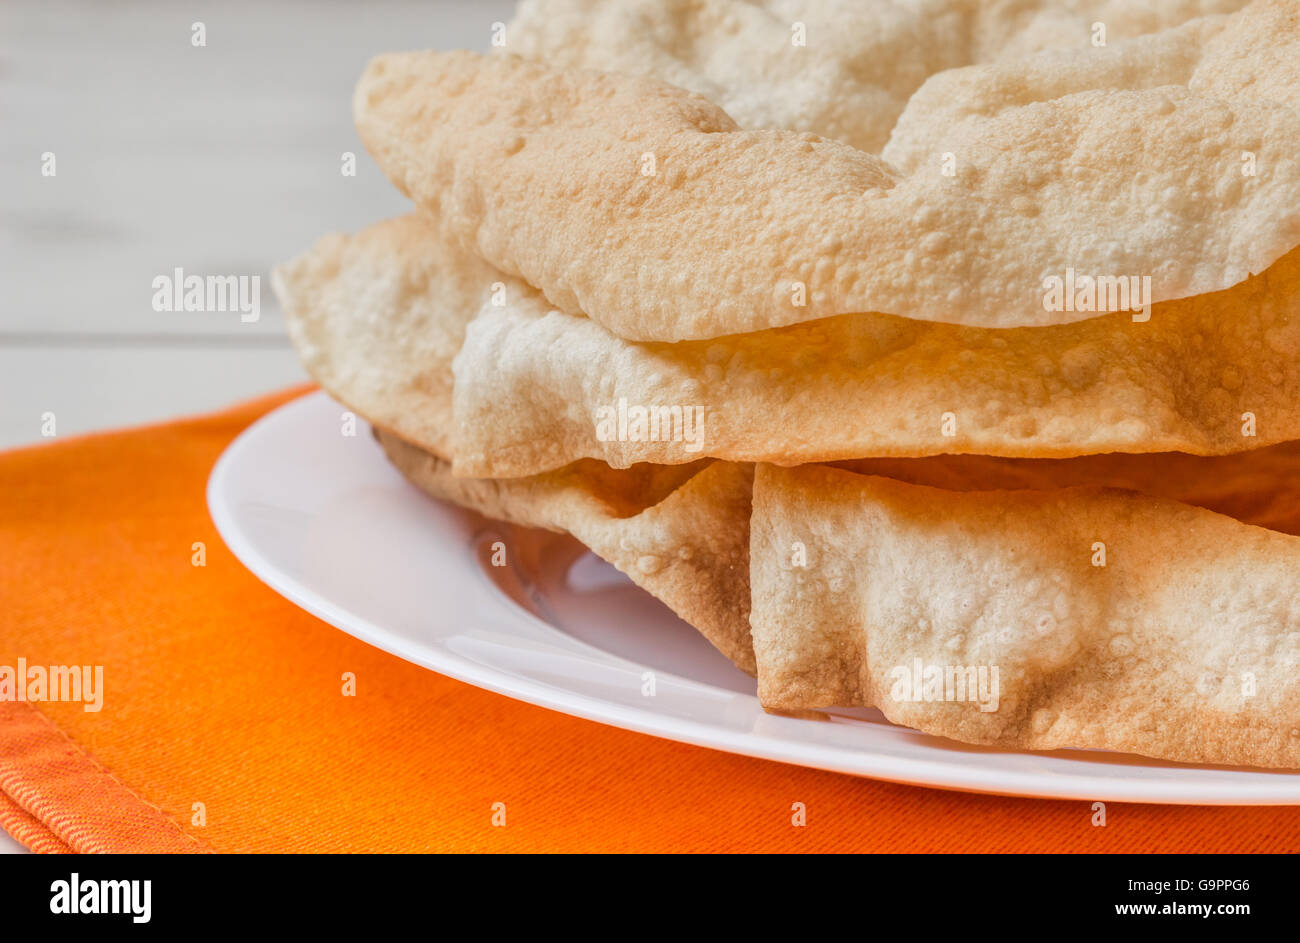 Fried pappadums on a white wooden table Stock Photo